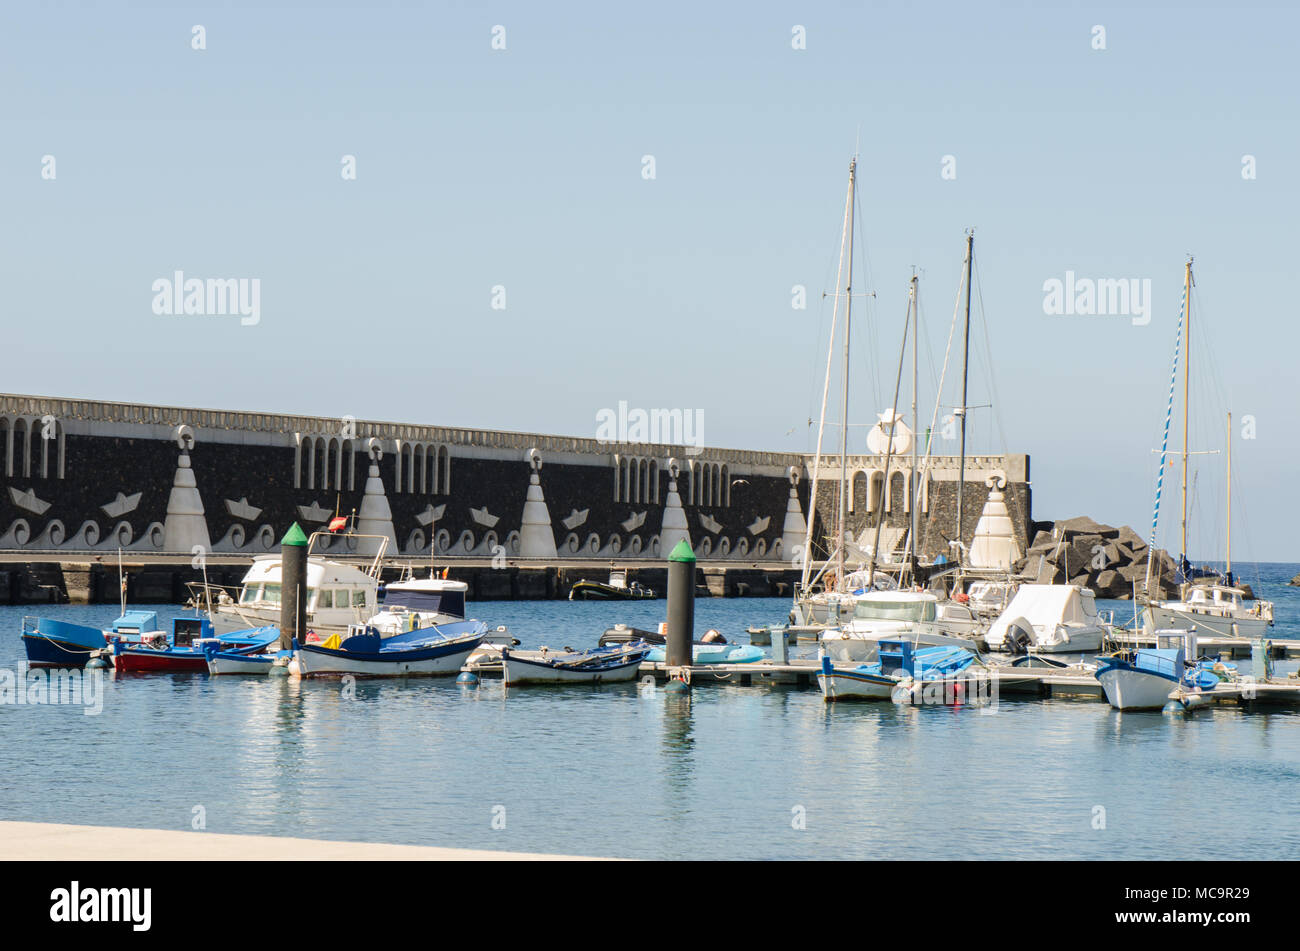 Fishing port in La Restinga, seaside village in the south of the El Hierro, privileged region for divind. Canary island, Spain. Stock Photo